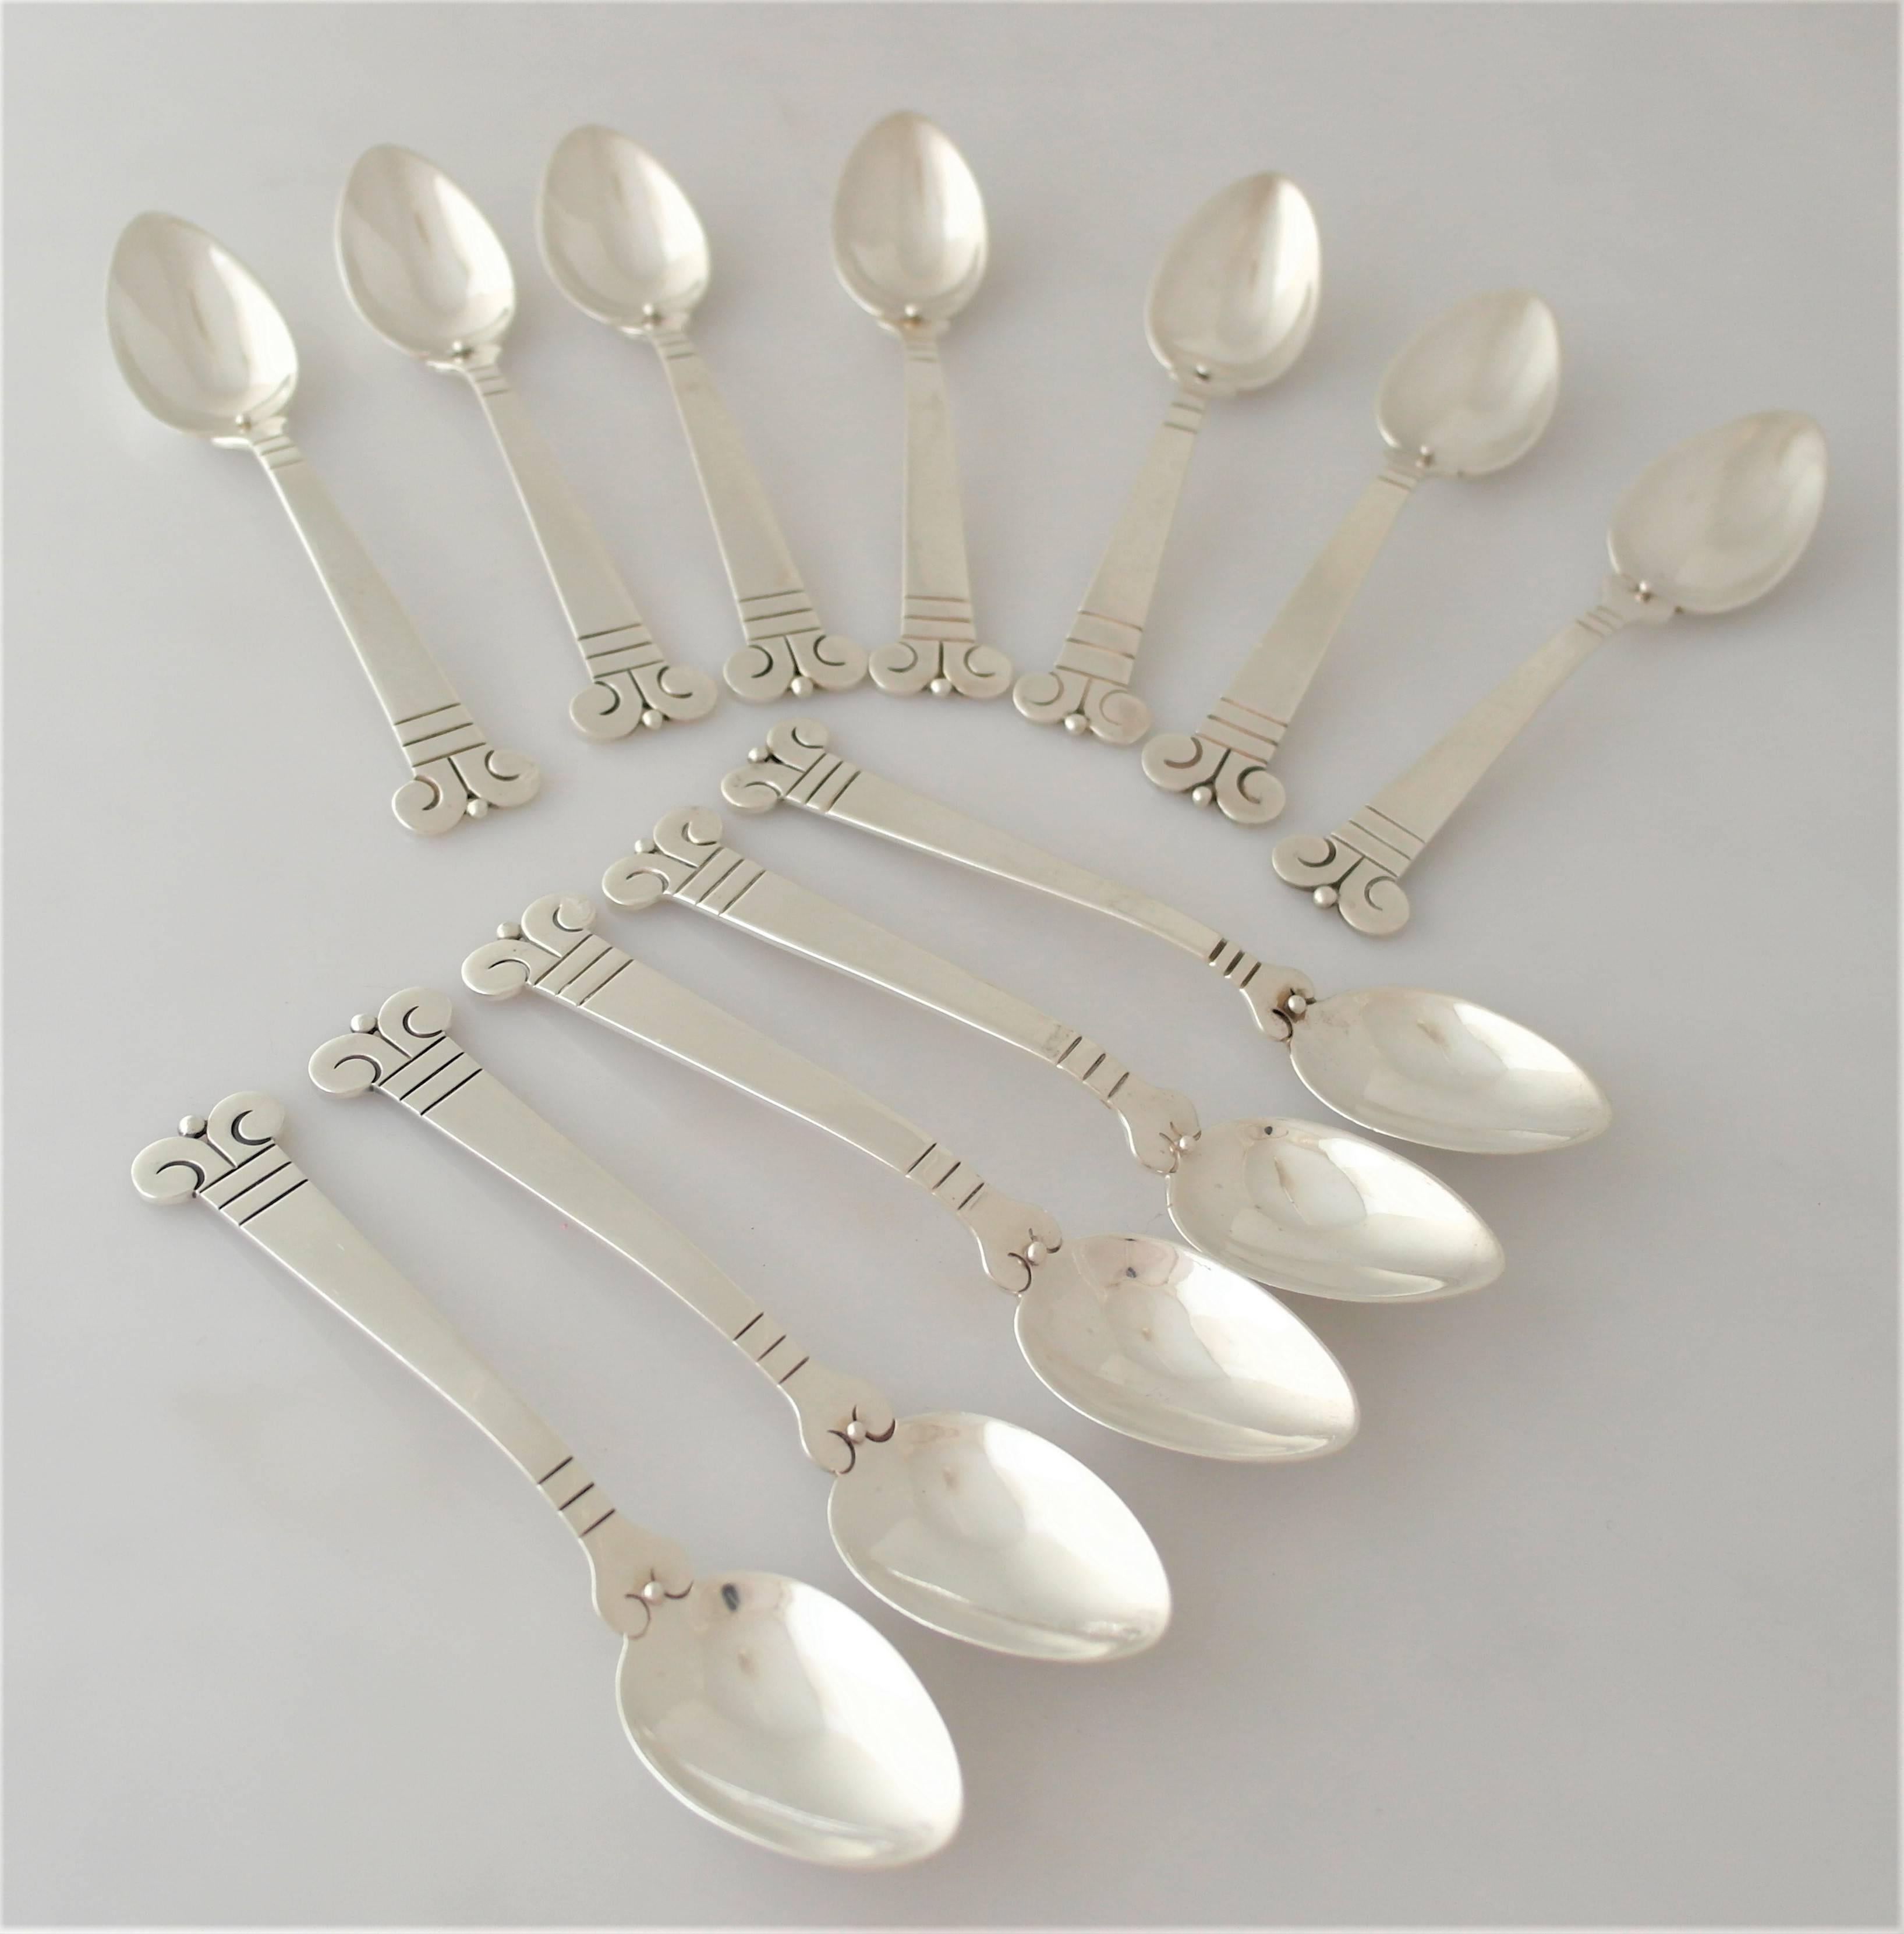 Mexican Hector Aguilar Aztec Pattern Set of 12 Spoons For Sale